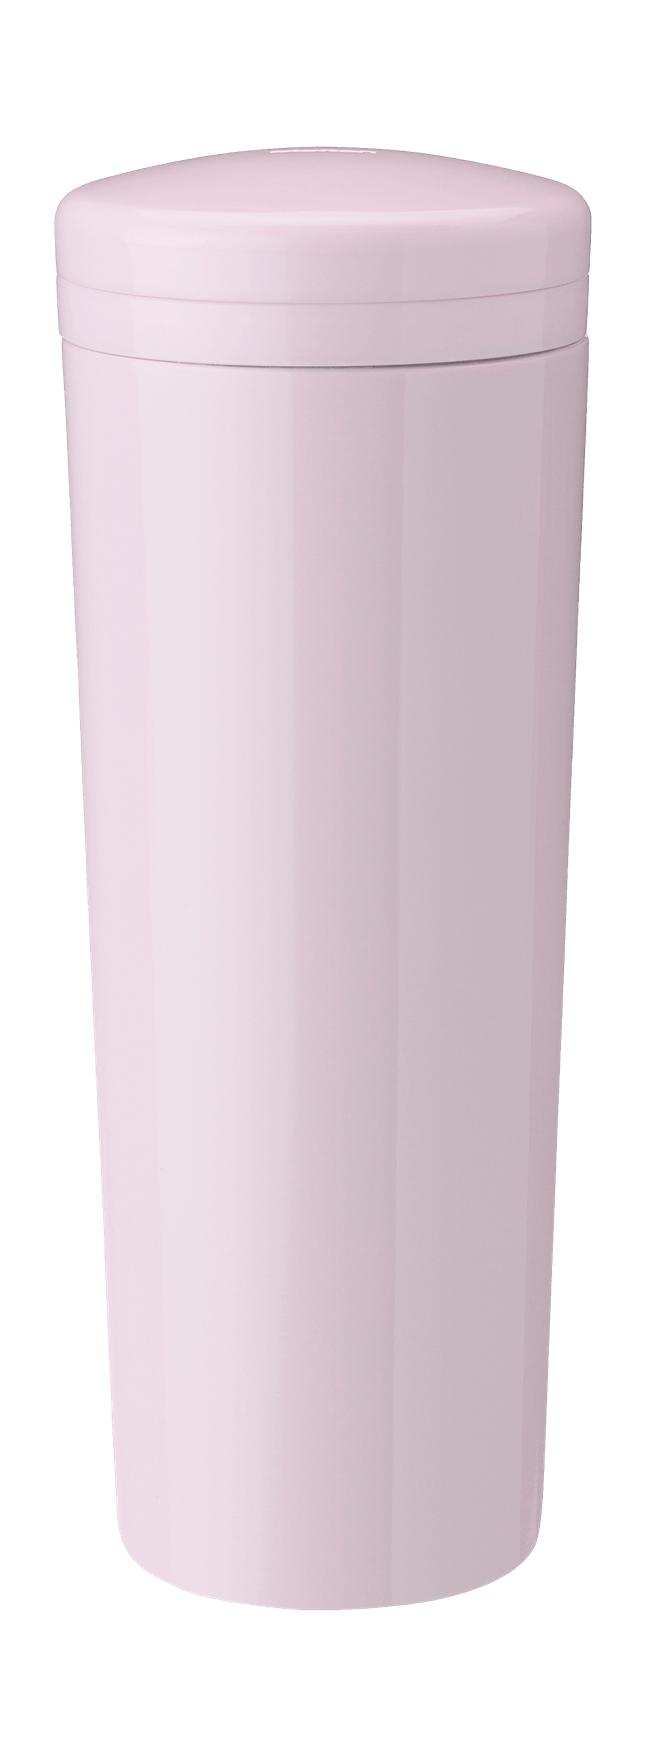 Stelton Carrie Thermo Bottle 0,5 L, Rose